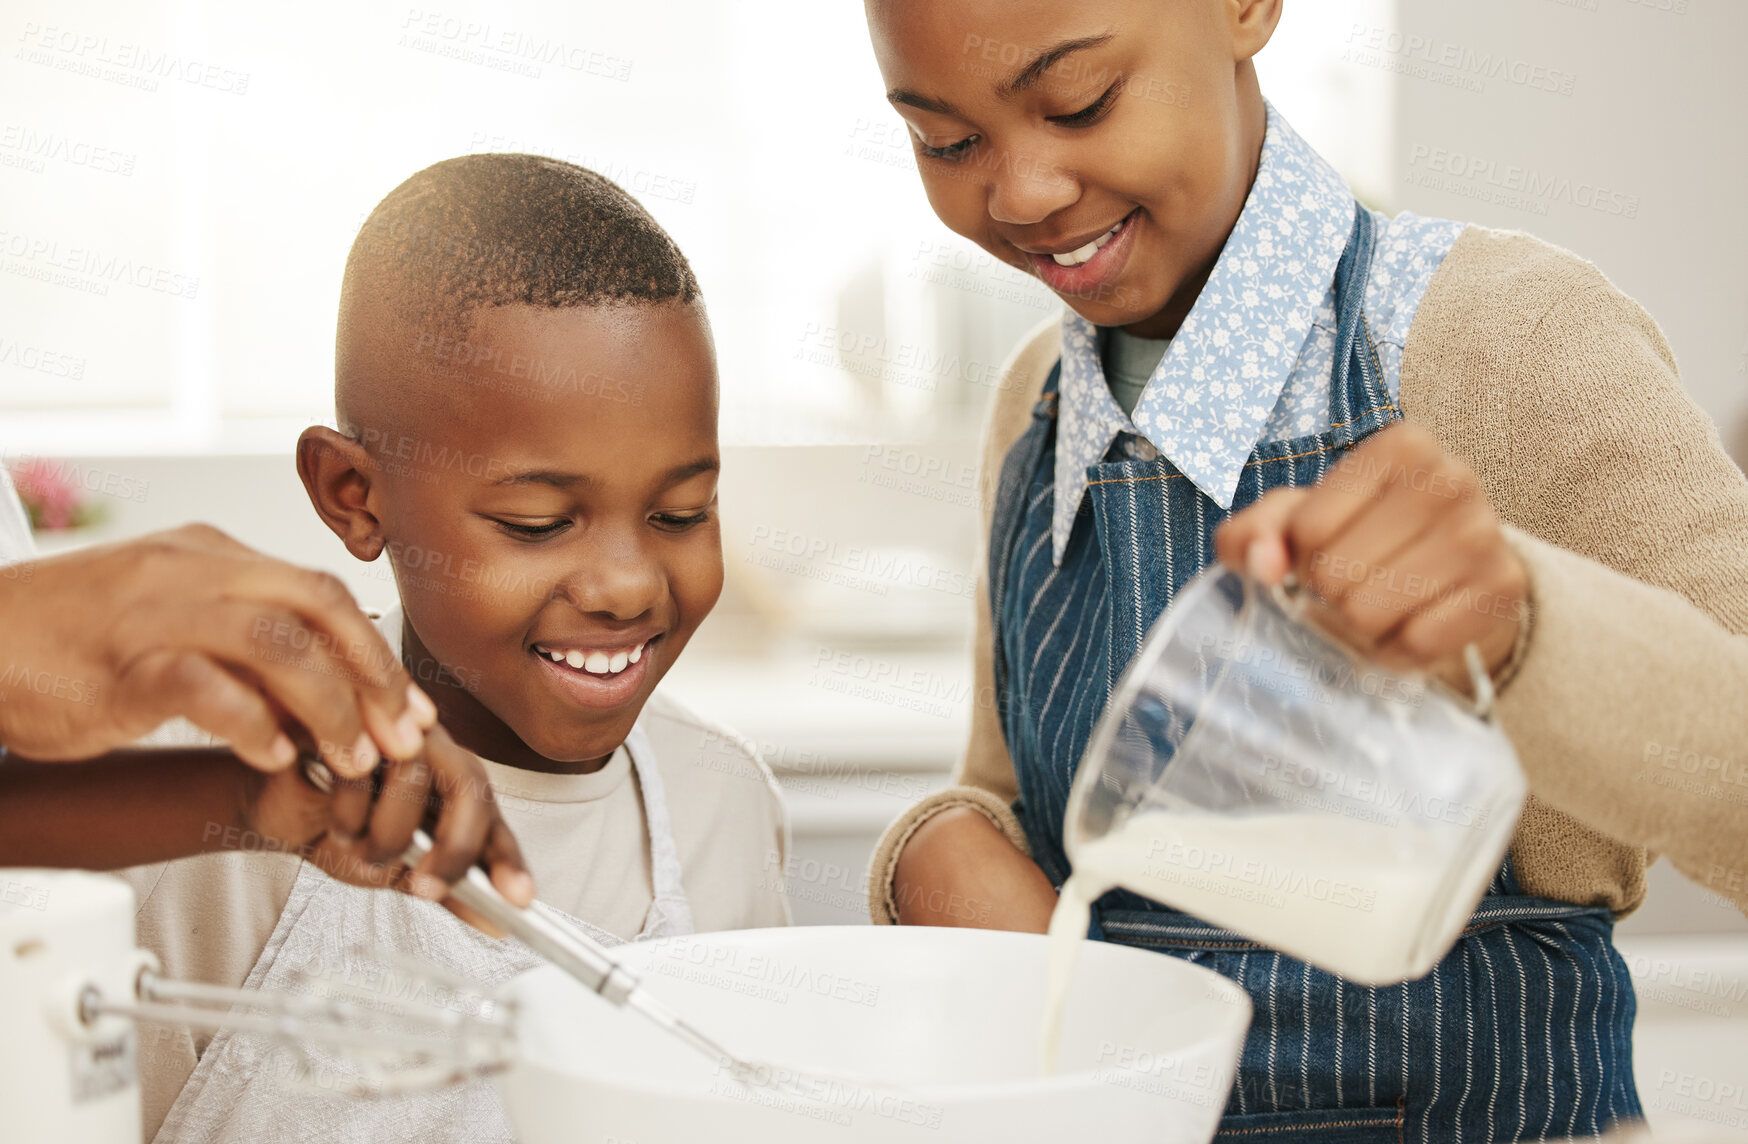 Buy stock photo Cropped shot of a grandmother baking with her two grandkids at home